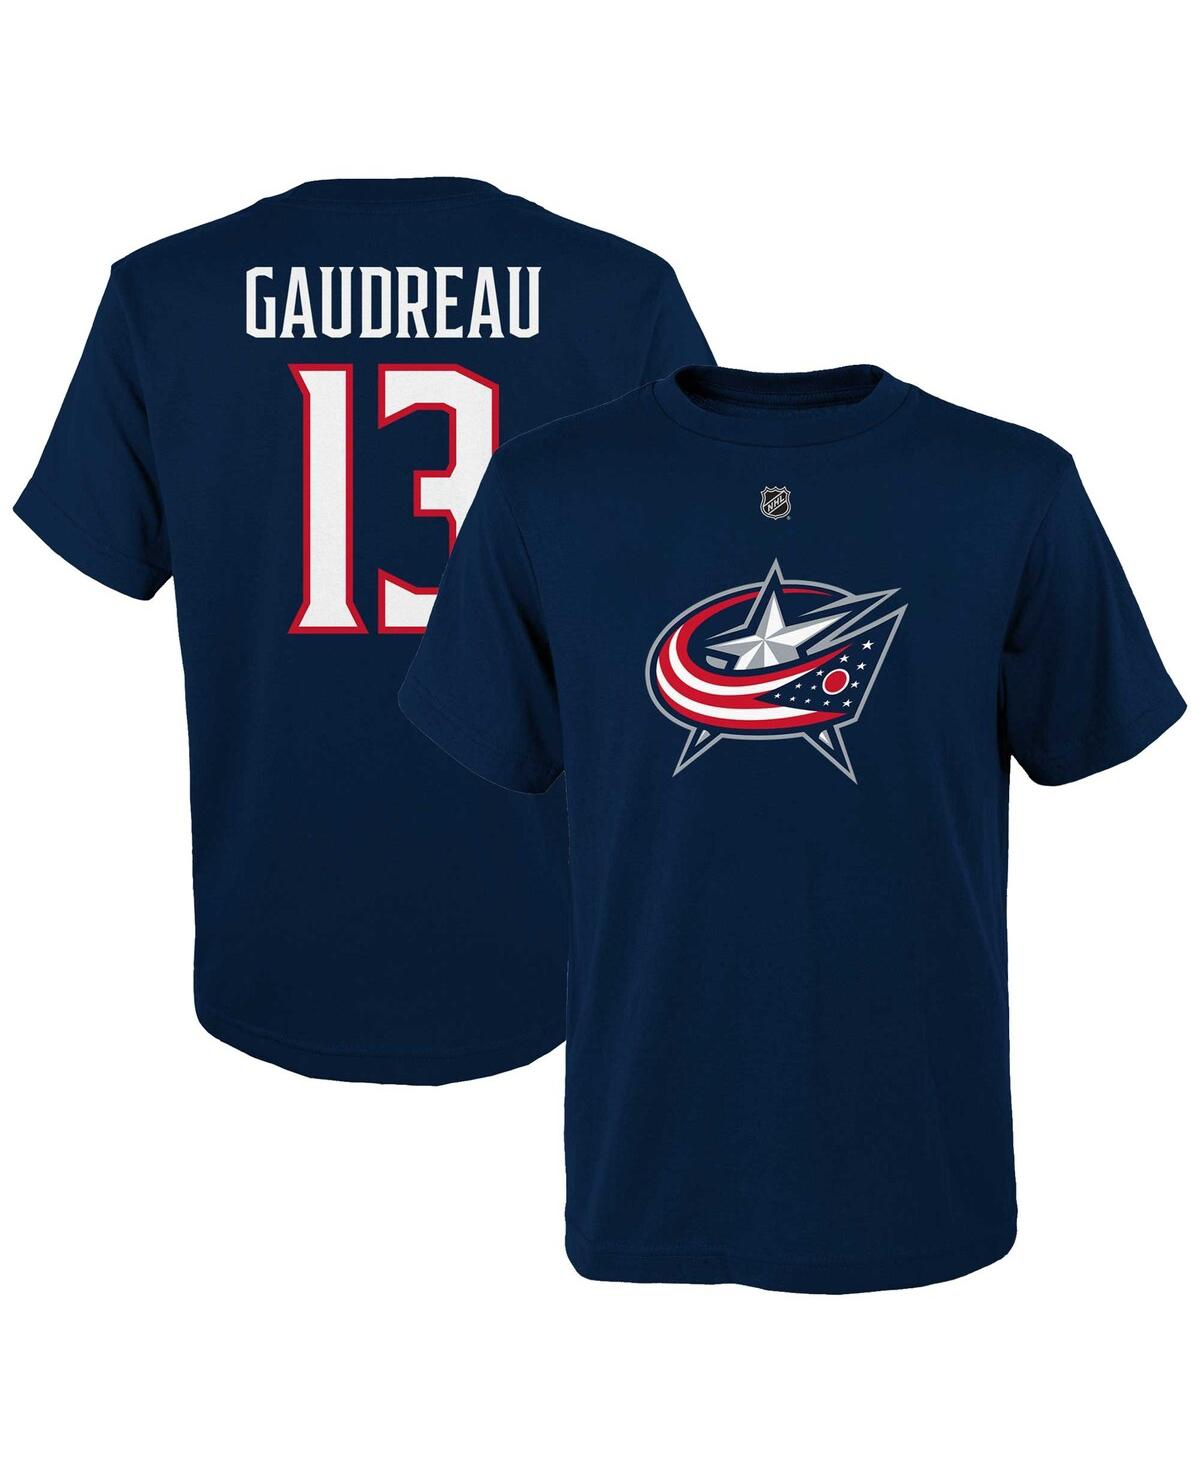 Outerstuff Kids' Big Boys And Girls Johnny Gaudreau Navy Columbus Blue Jackets Player Name And Number T-shirt